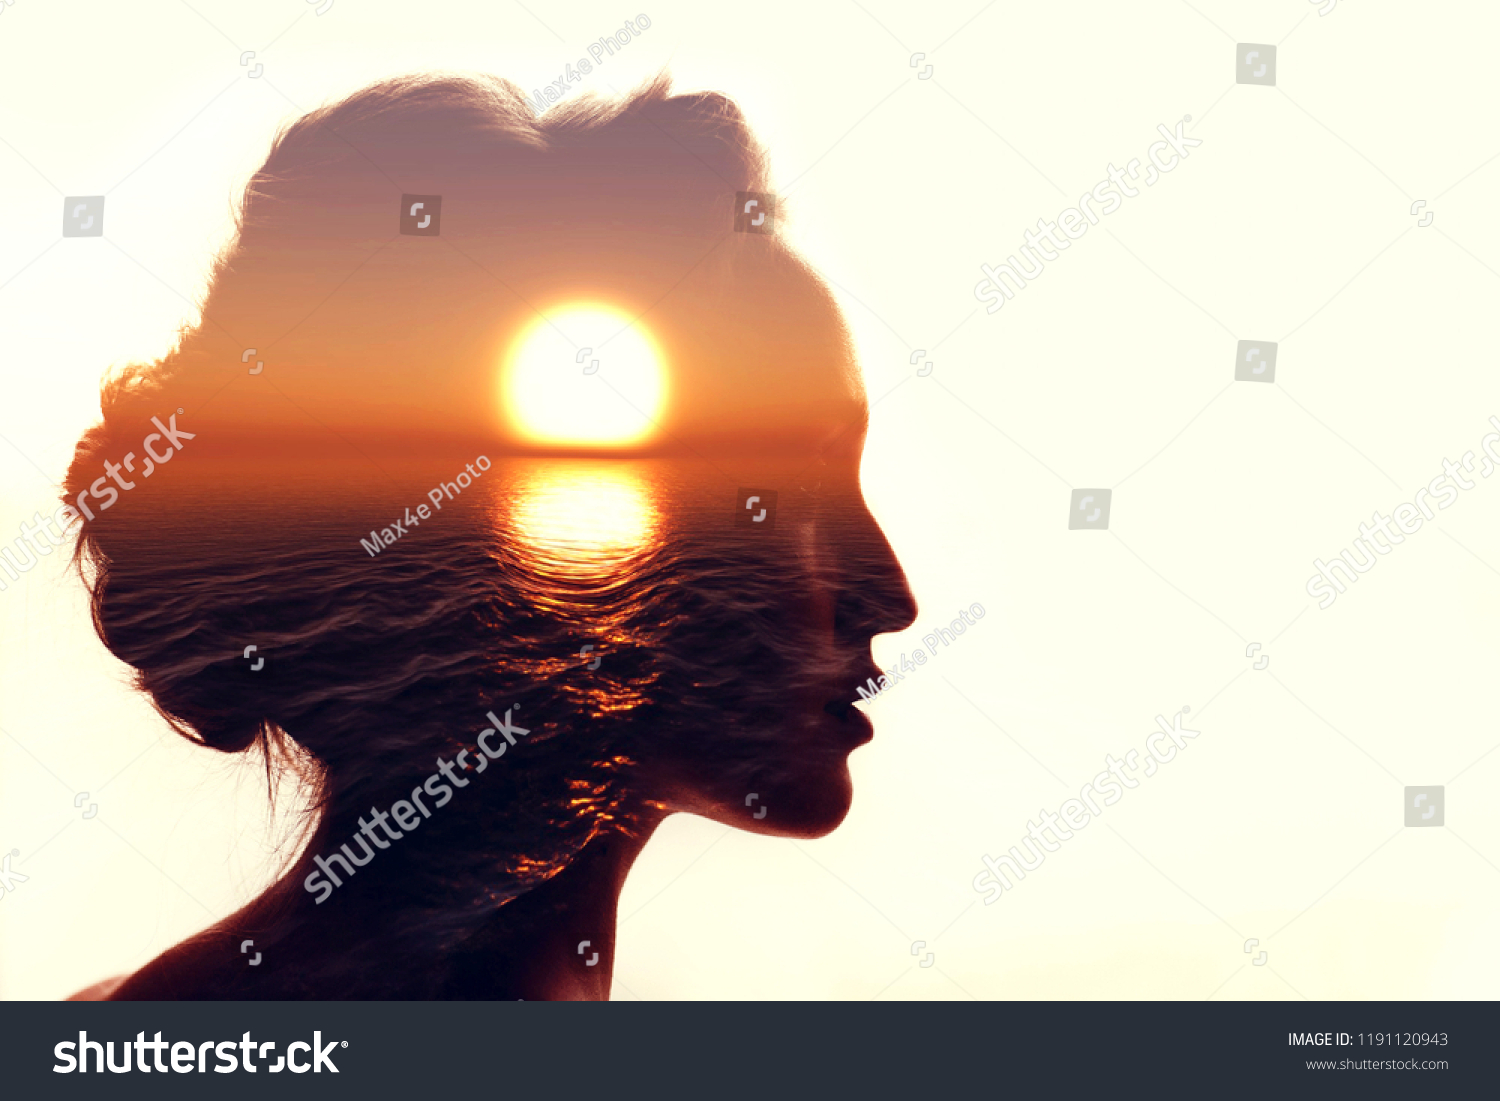 Psychology concept. Sunrise and woman silhouette.